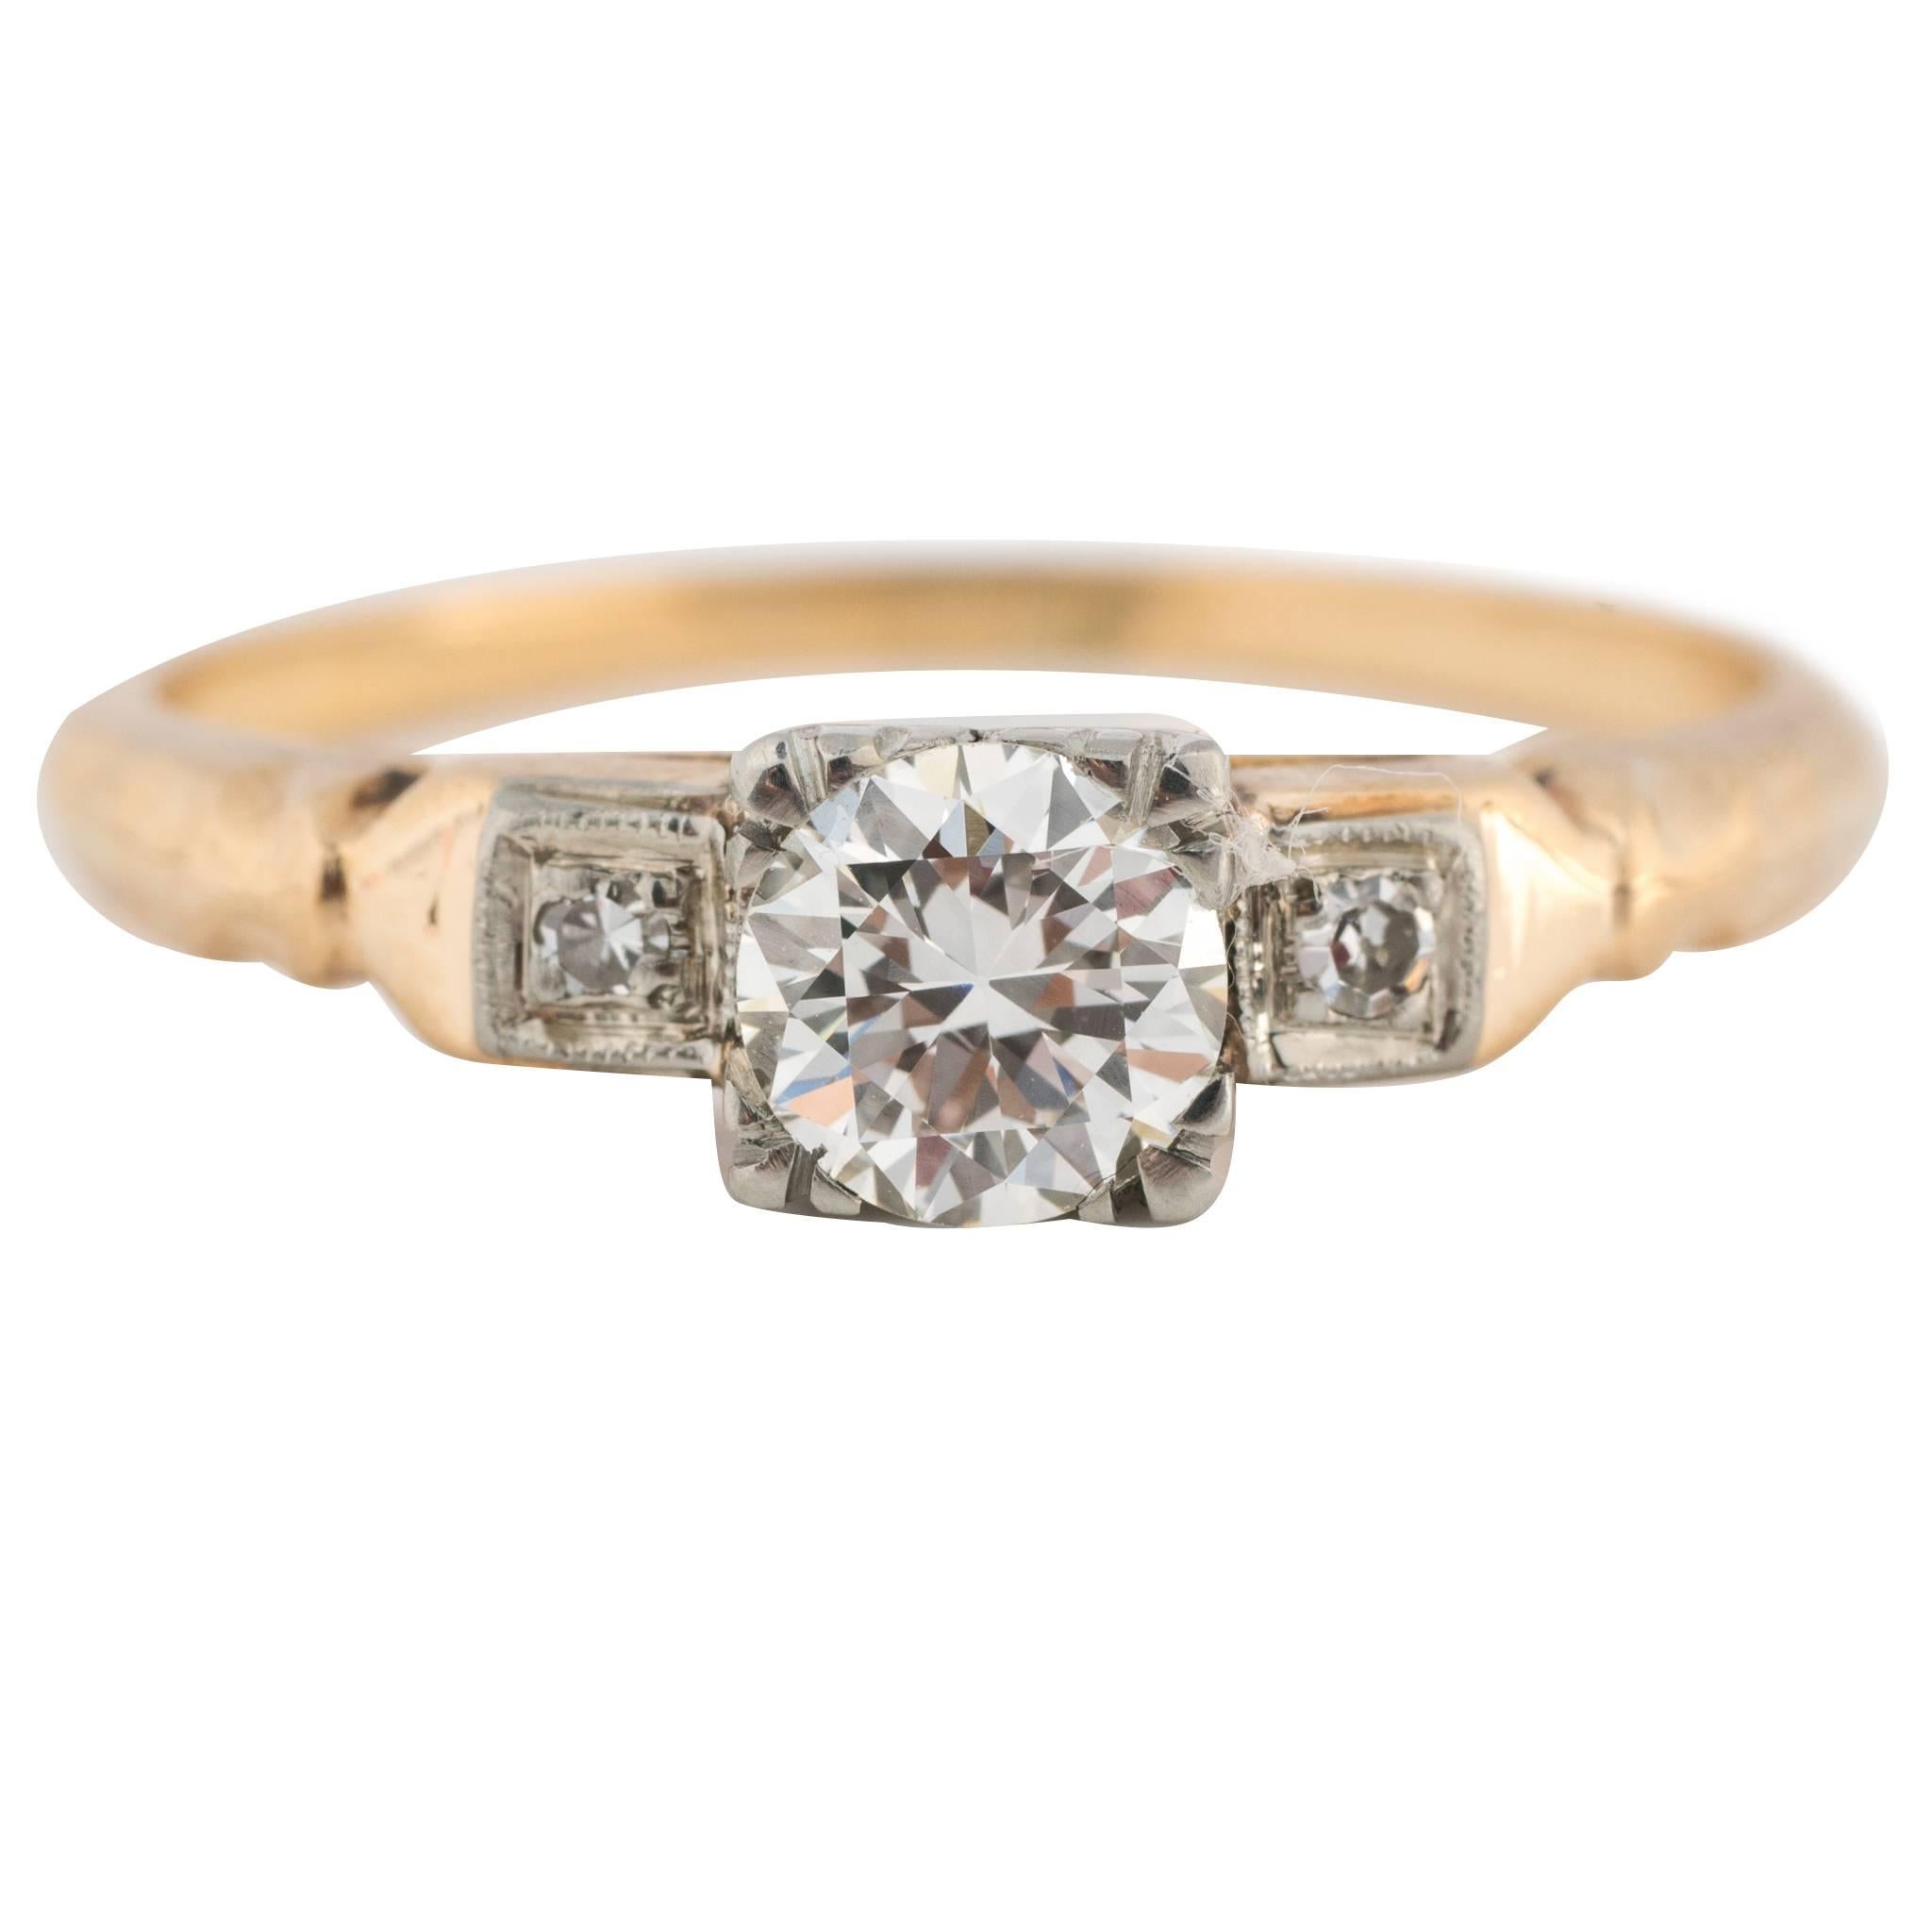 1920s Two-Tone Diamond Engagement Ring, GIA Certified